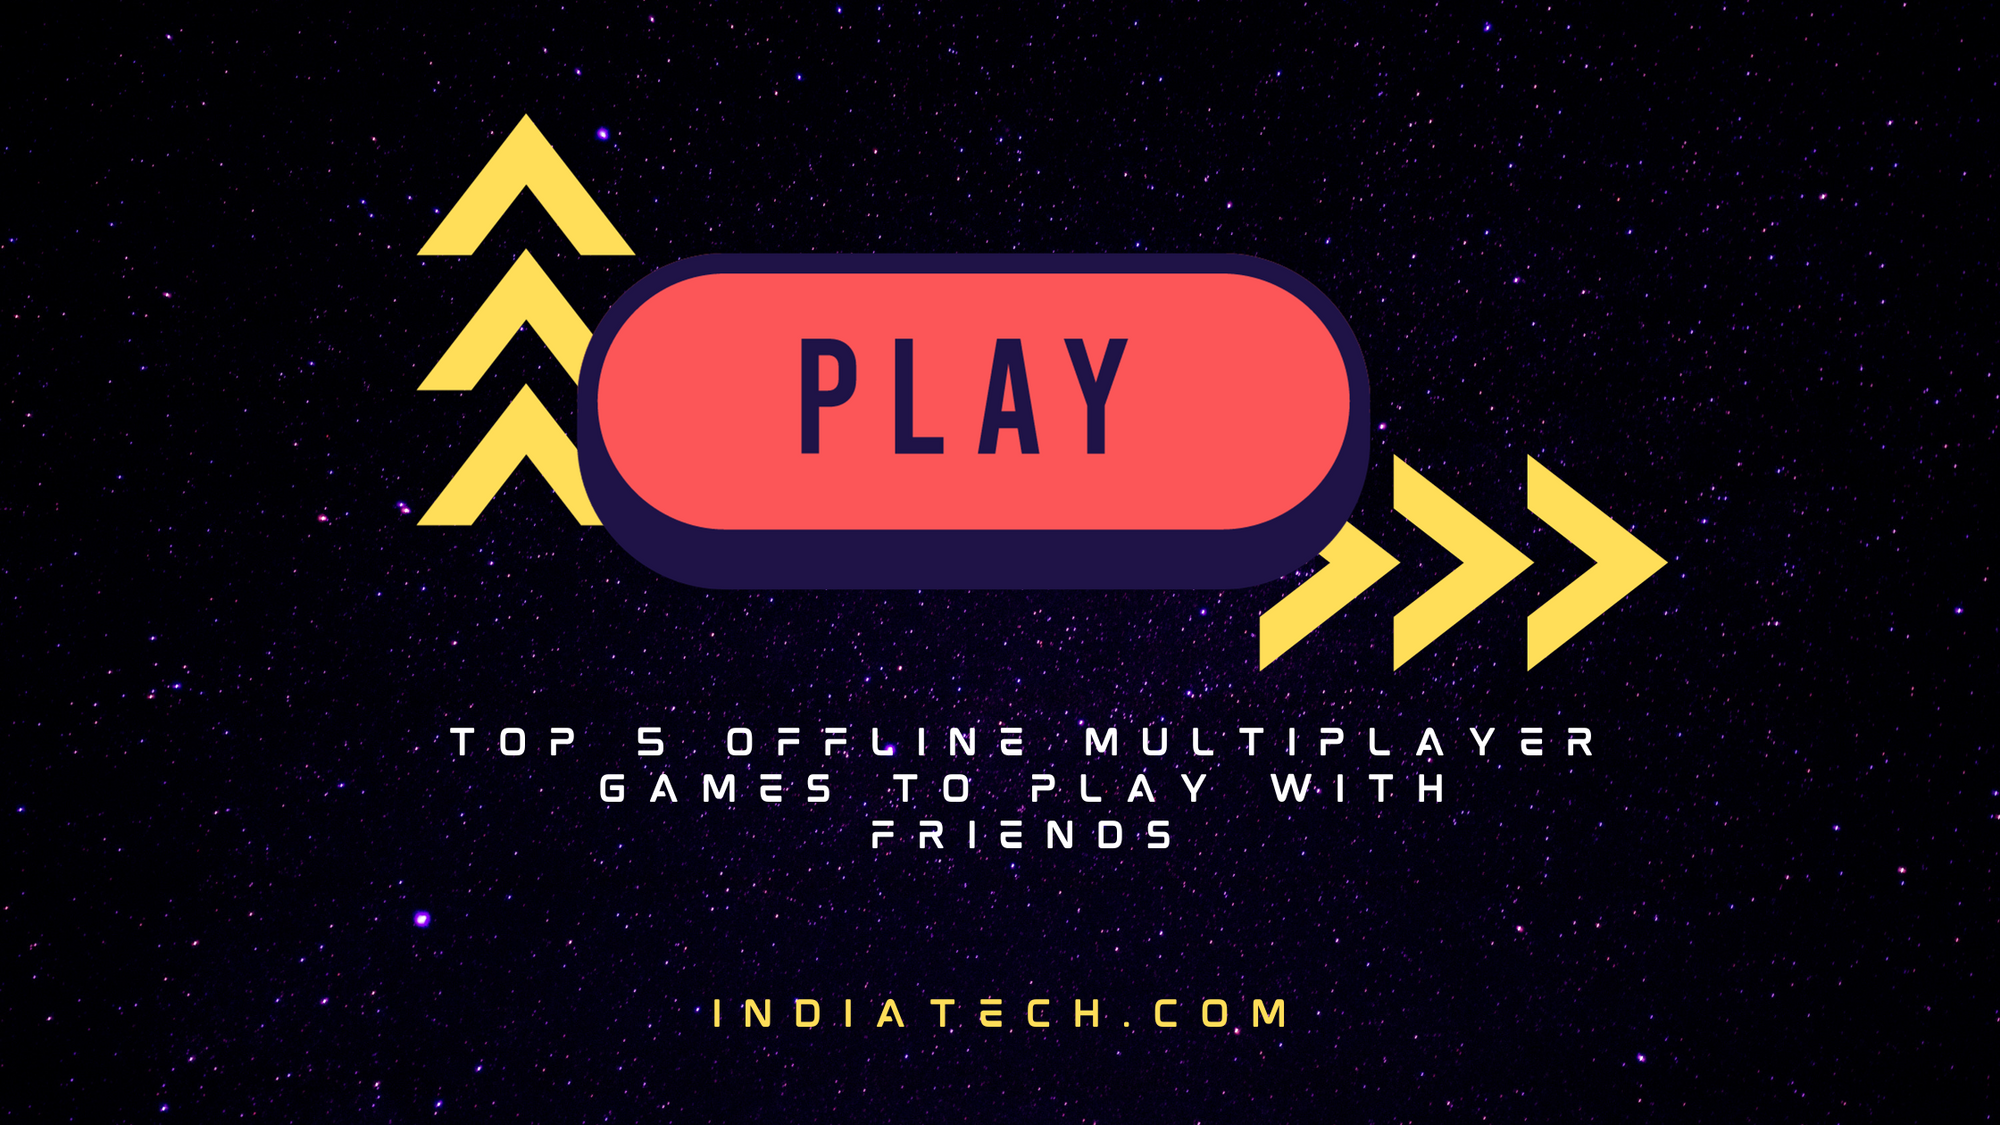 Top 5 Offline Multiplayer Games to Play with Friends